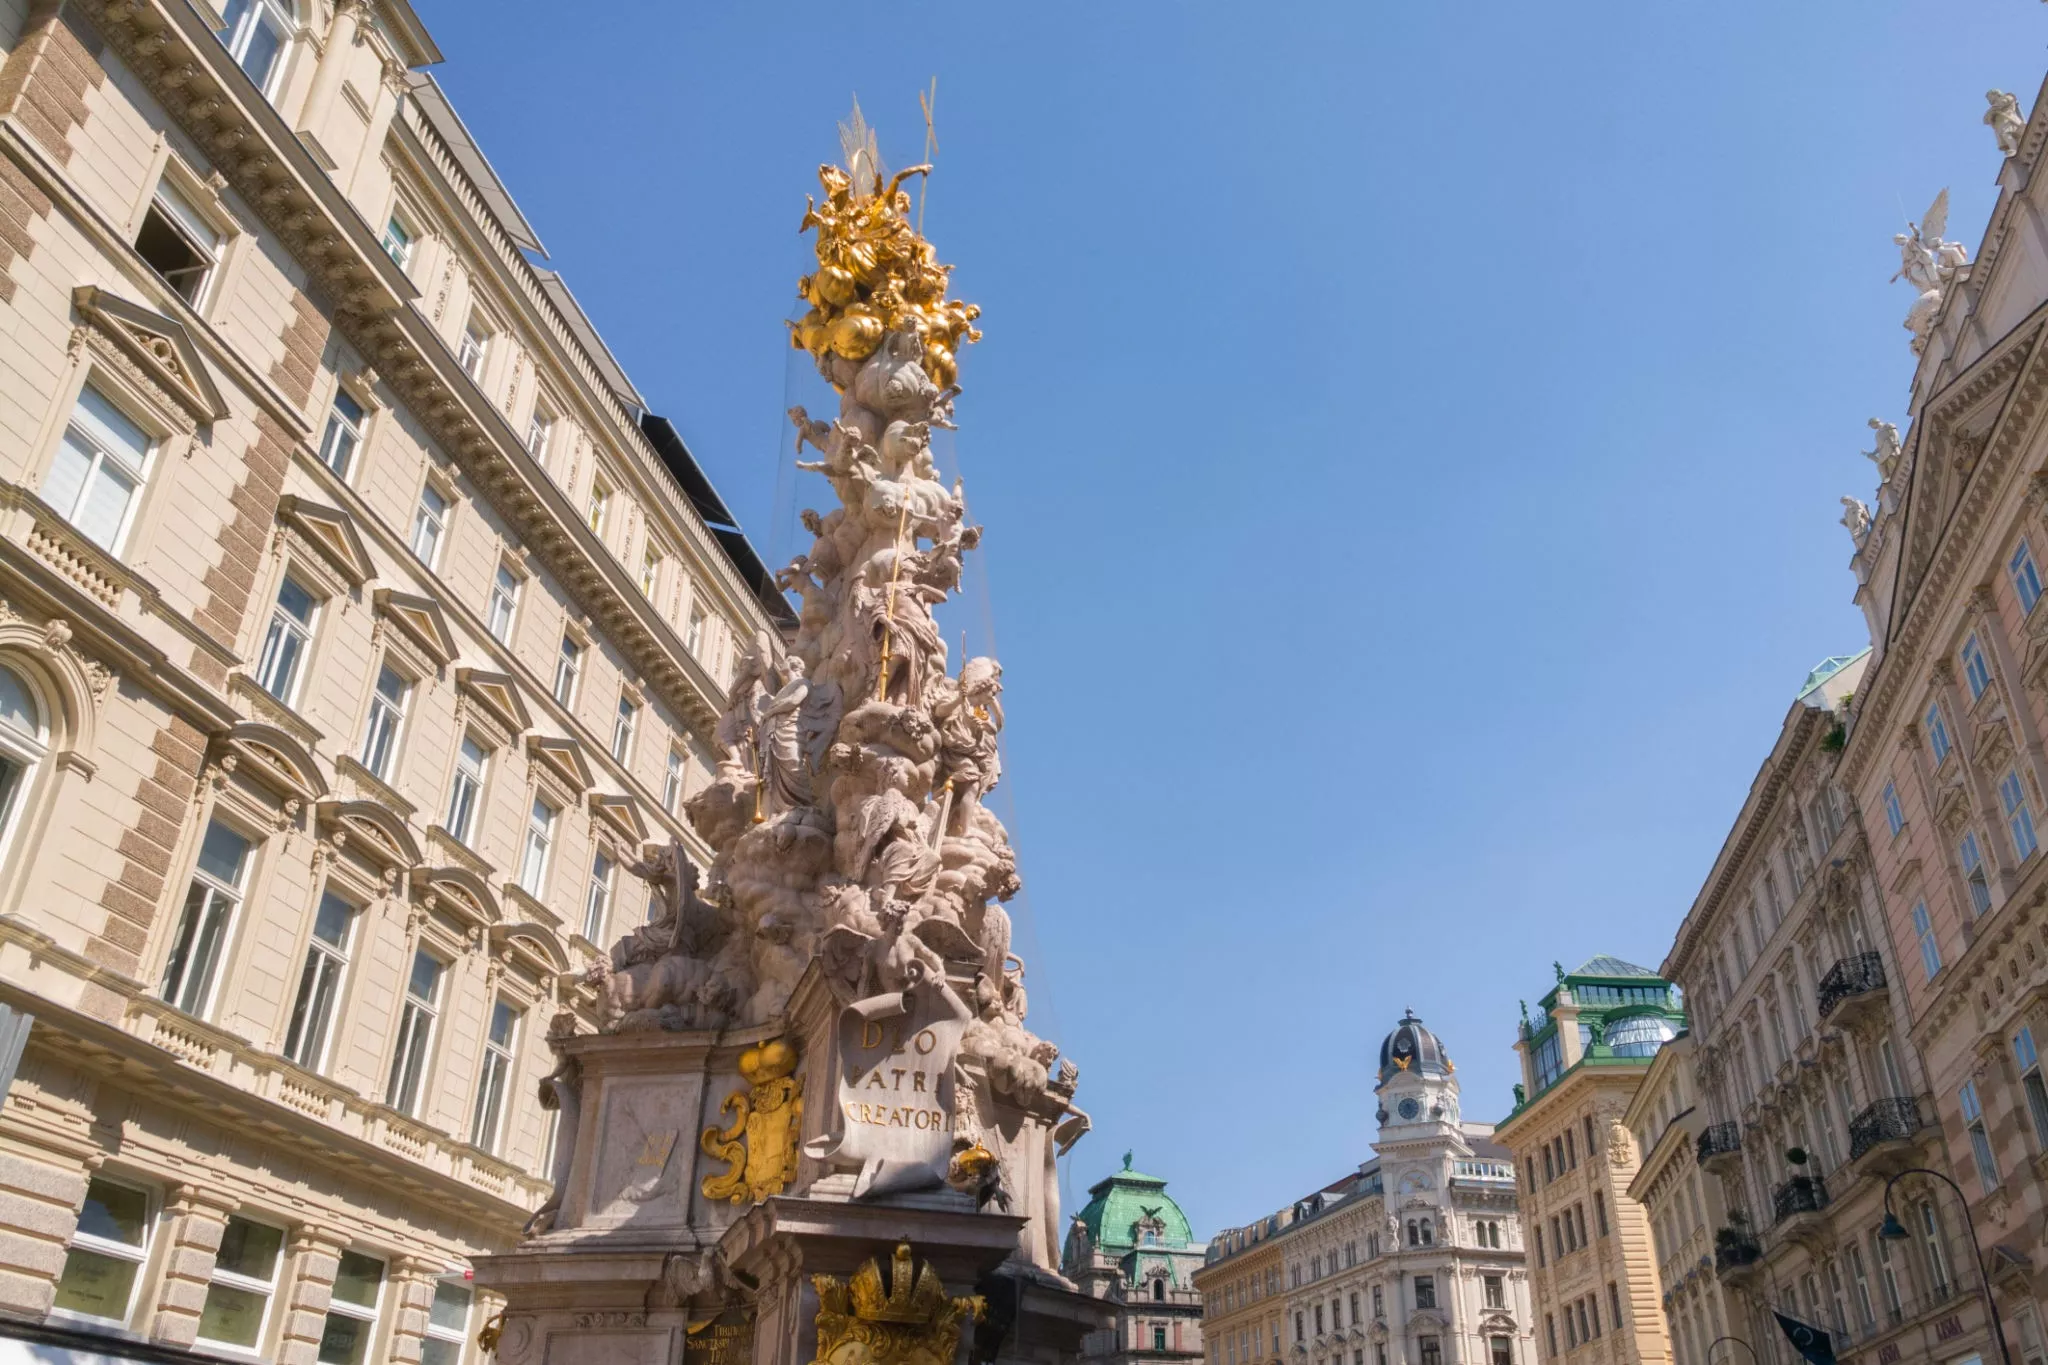 Plague Column in Austria, Europe | Monuments - Rated 4.1